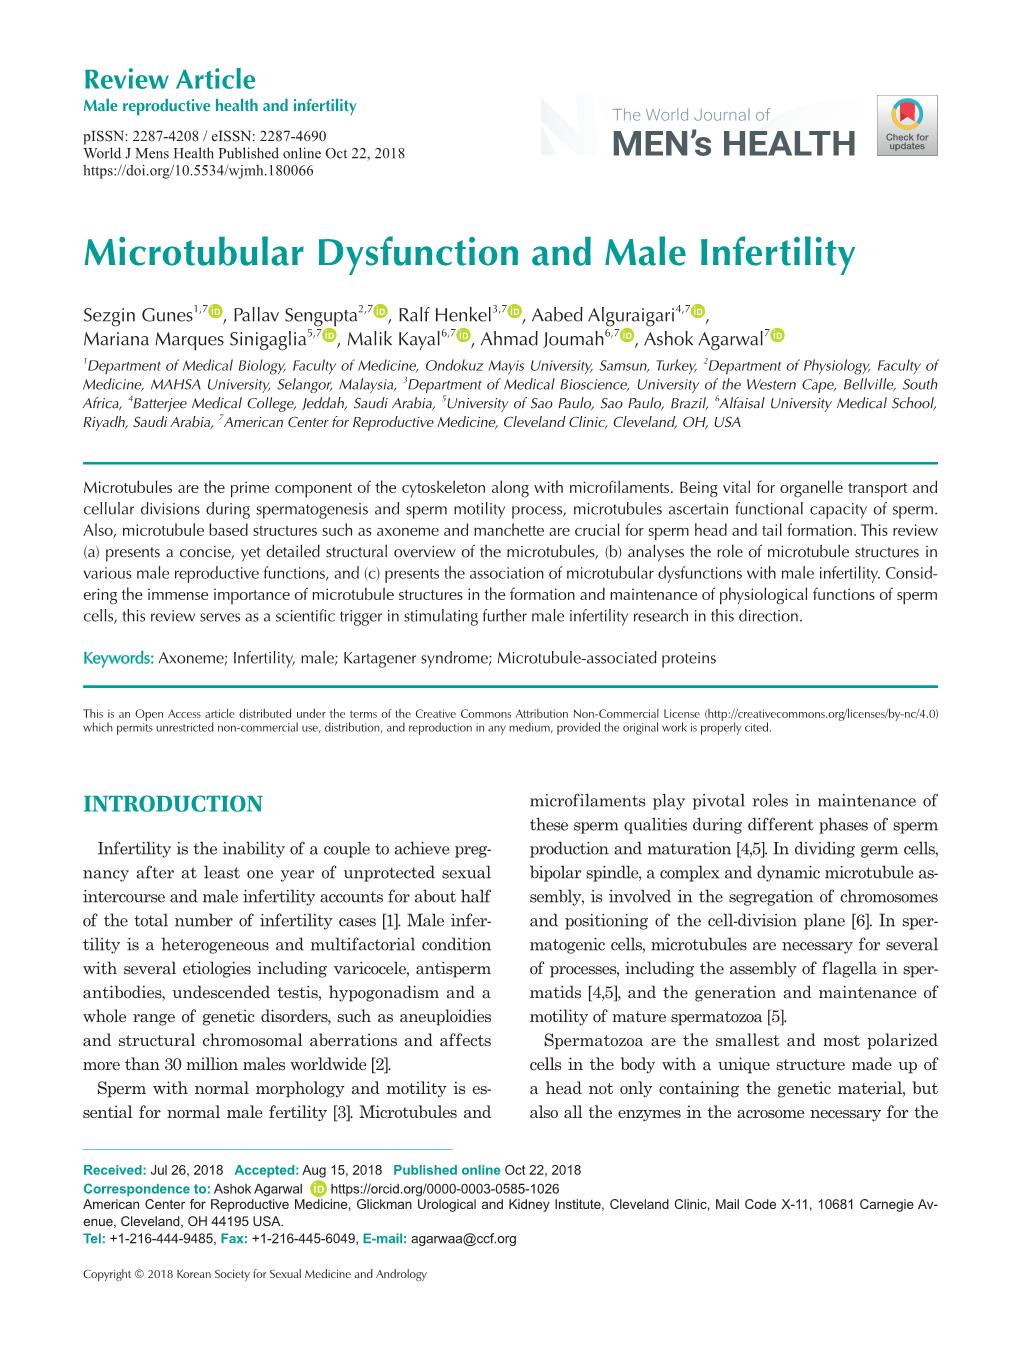 Microtubular Dysfunction and Male Infertility